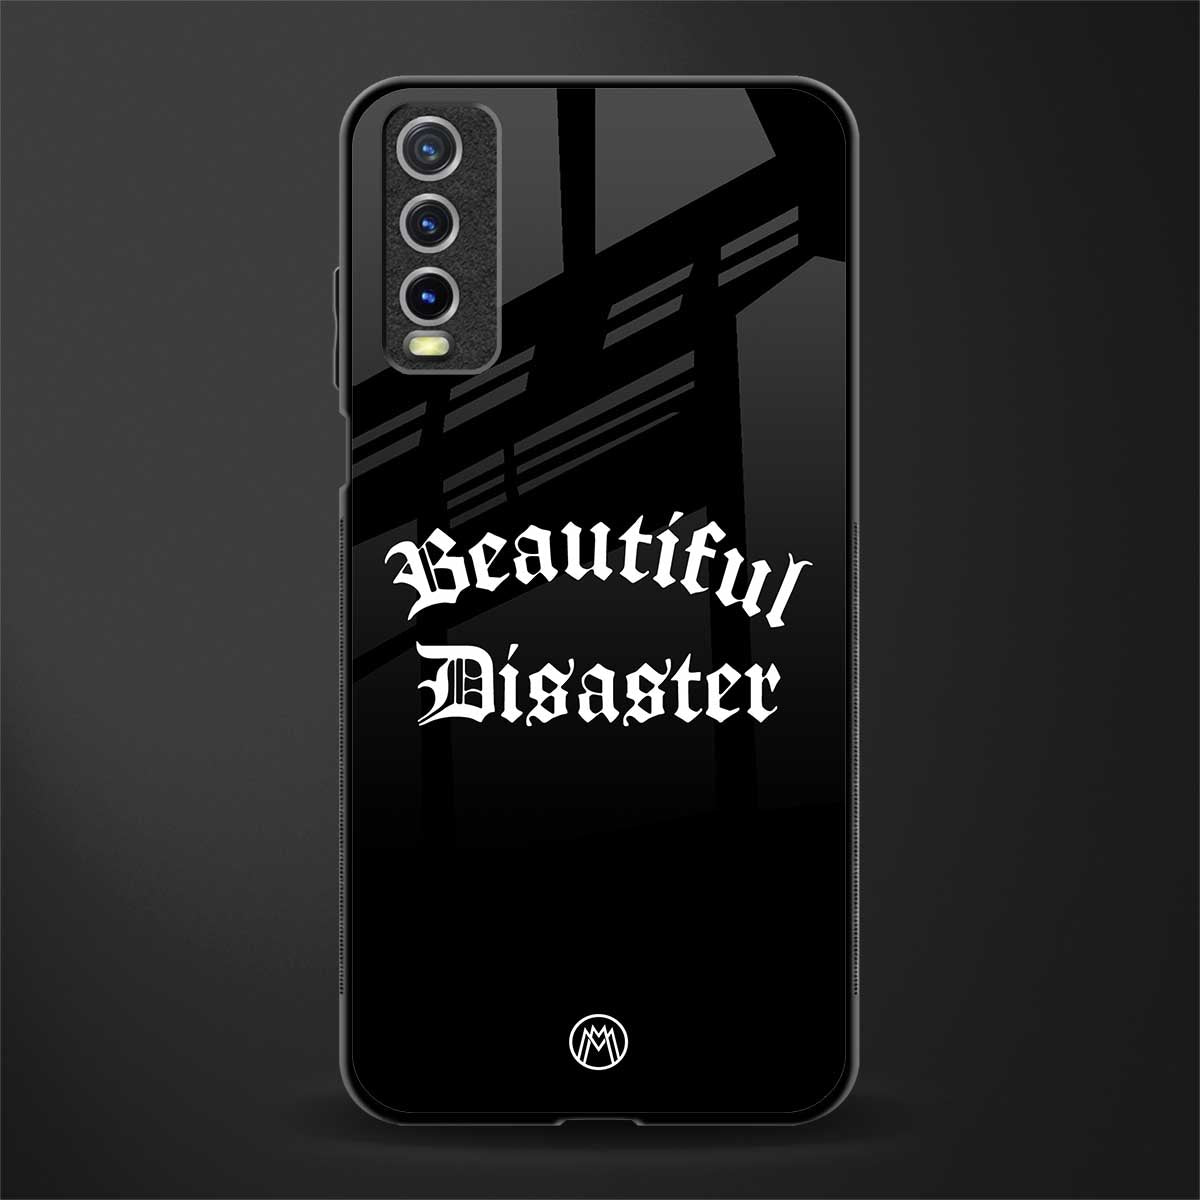 beautiful disaster glass case for vivo y20 image